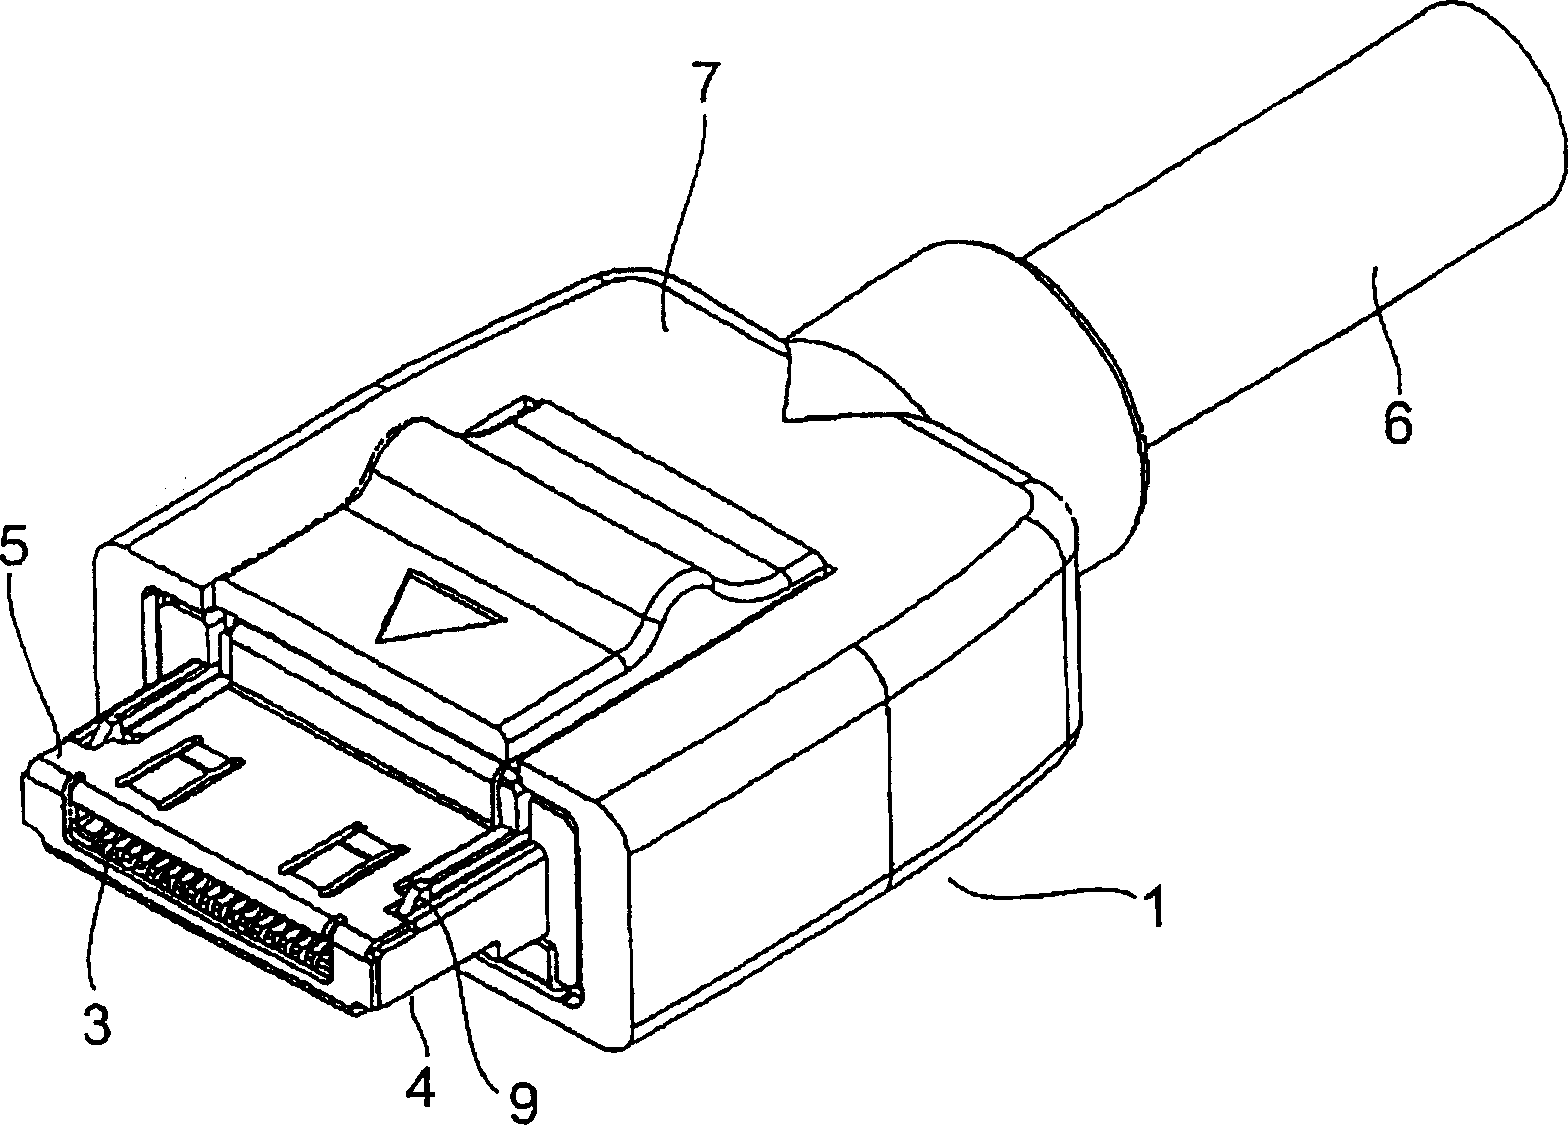 Contact holding structure of connector